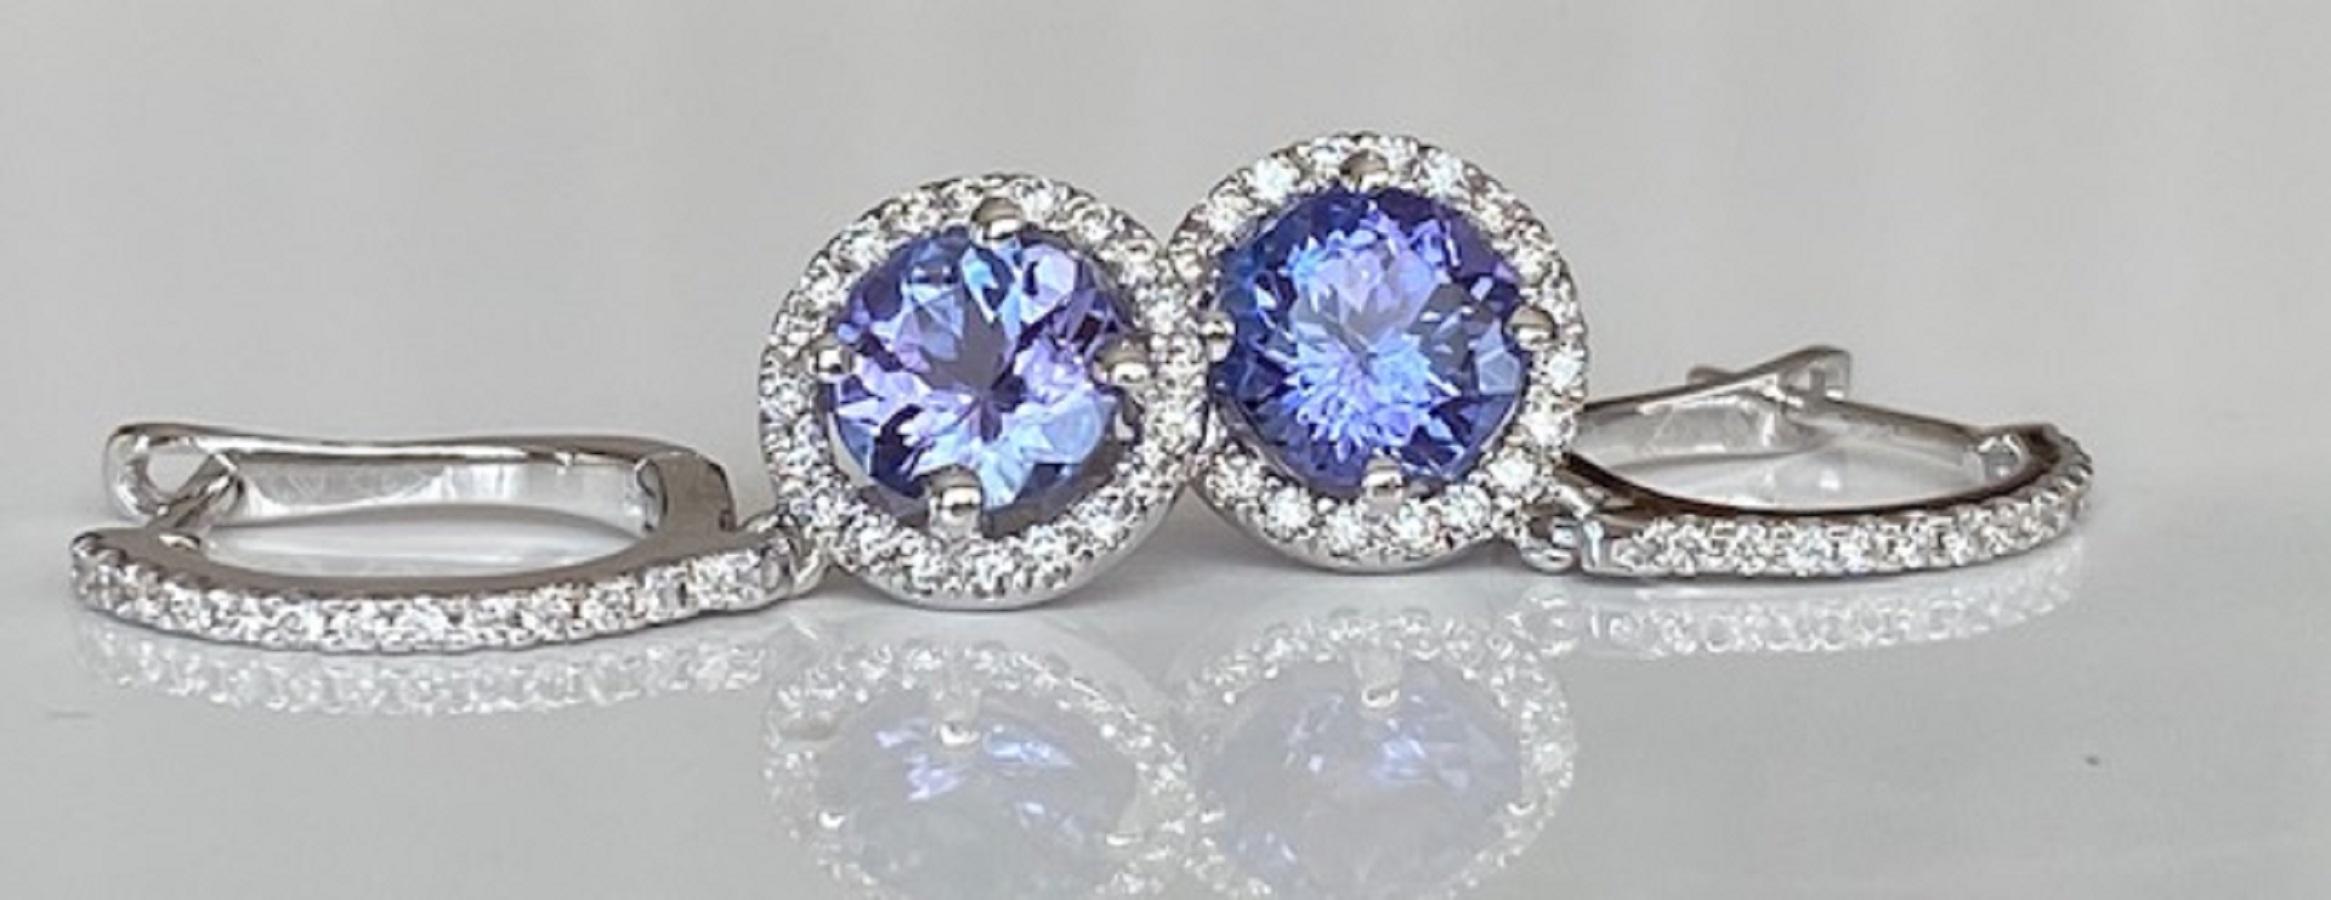 Contemporary 18 Karat White Gold Earrings with Tanzanite and Diamonds